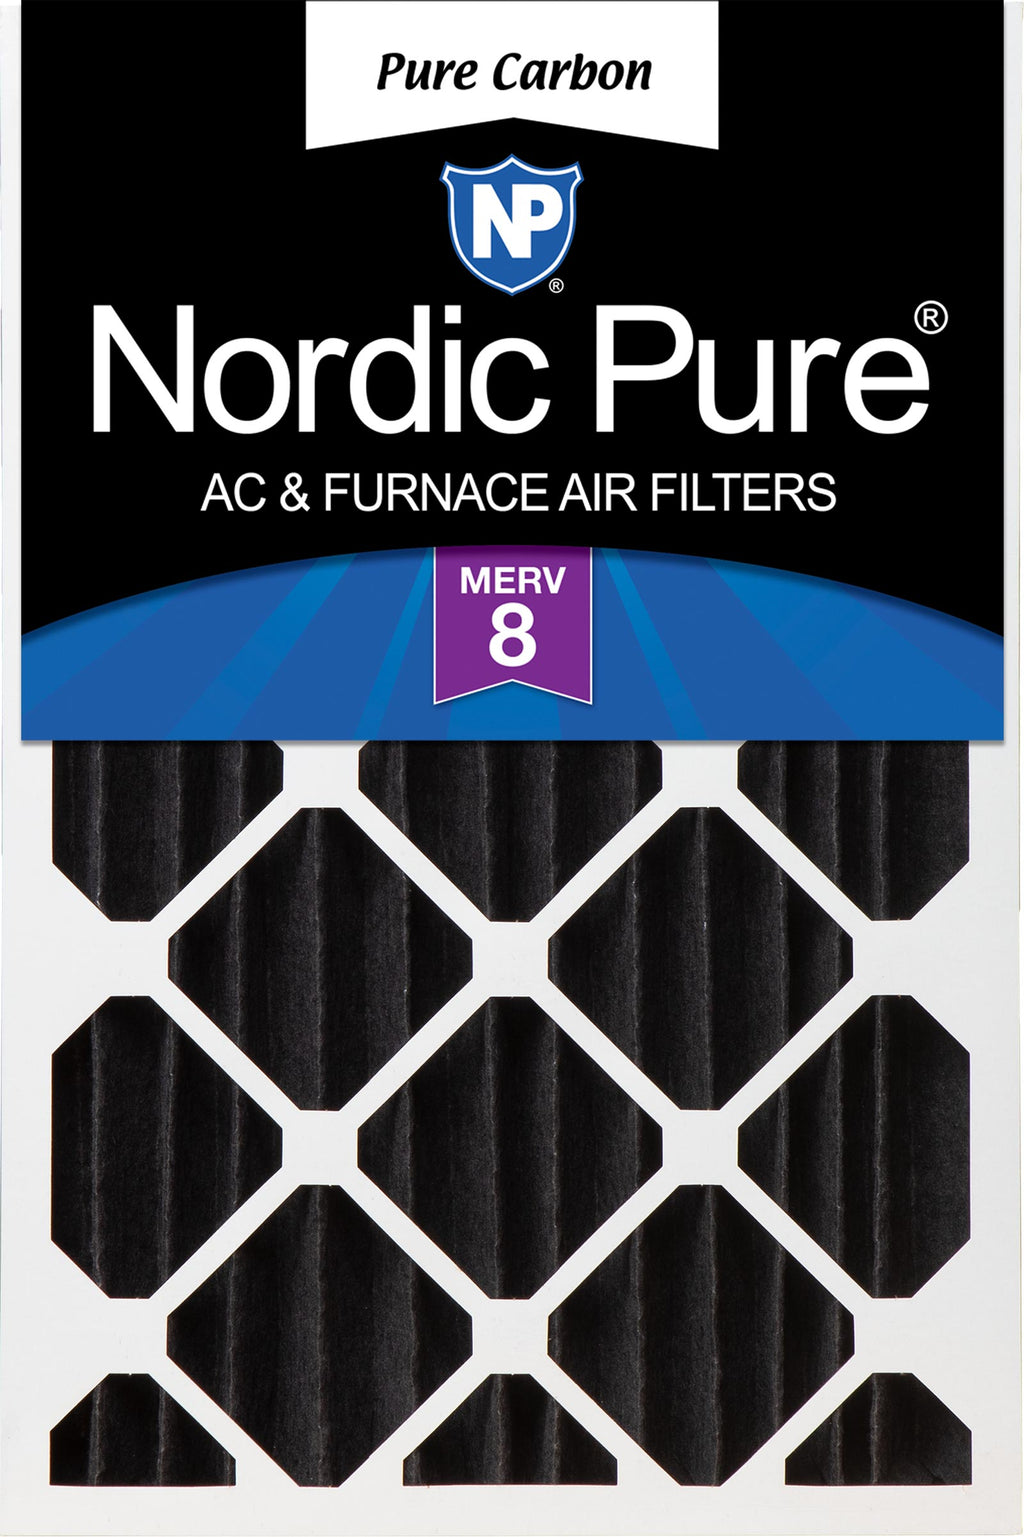 16x24x4 (3 5/8) Pure Carbon Pleated Odor Reduction Merv 8 Furnace Filter